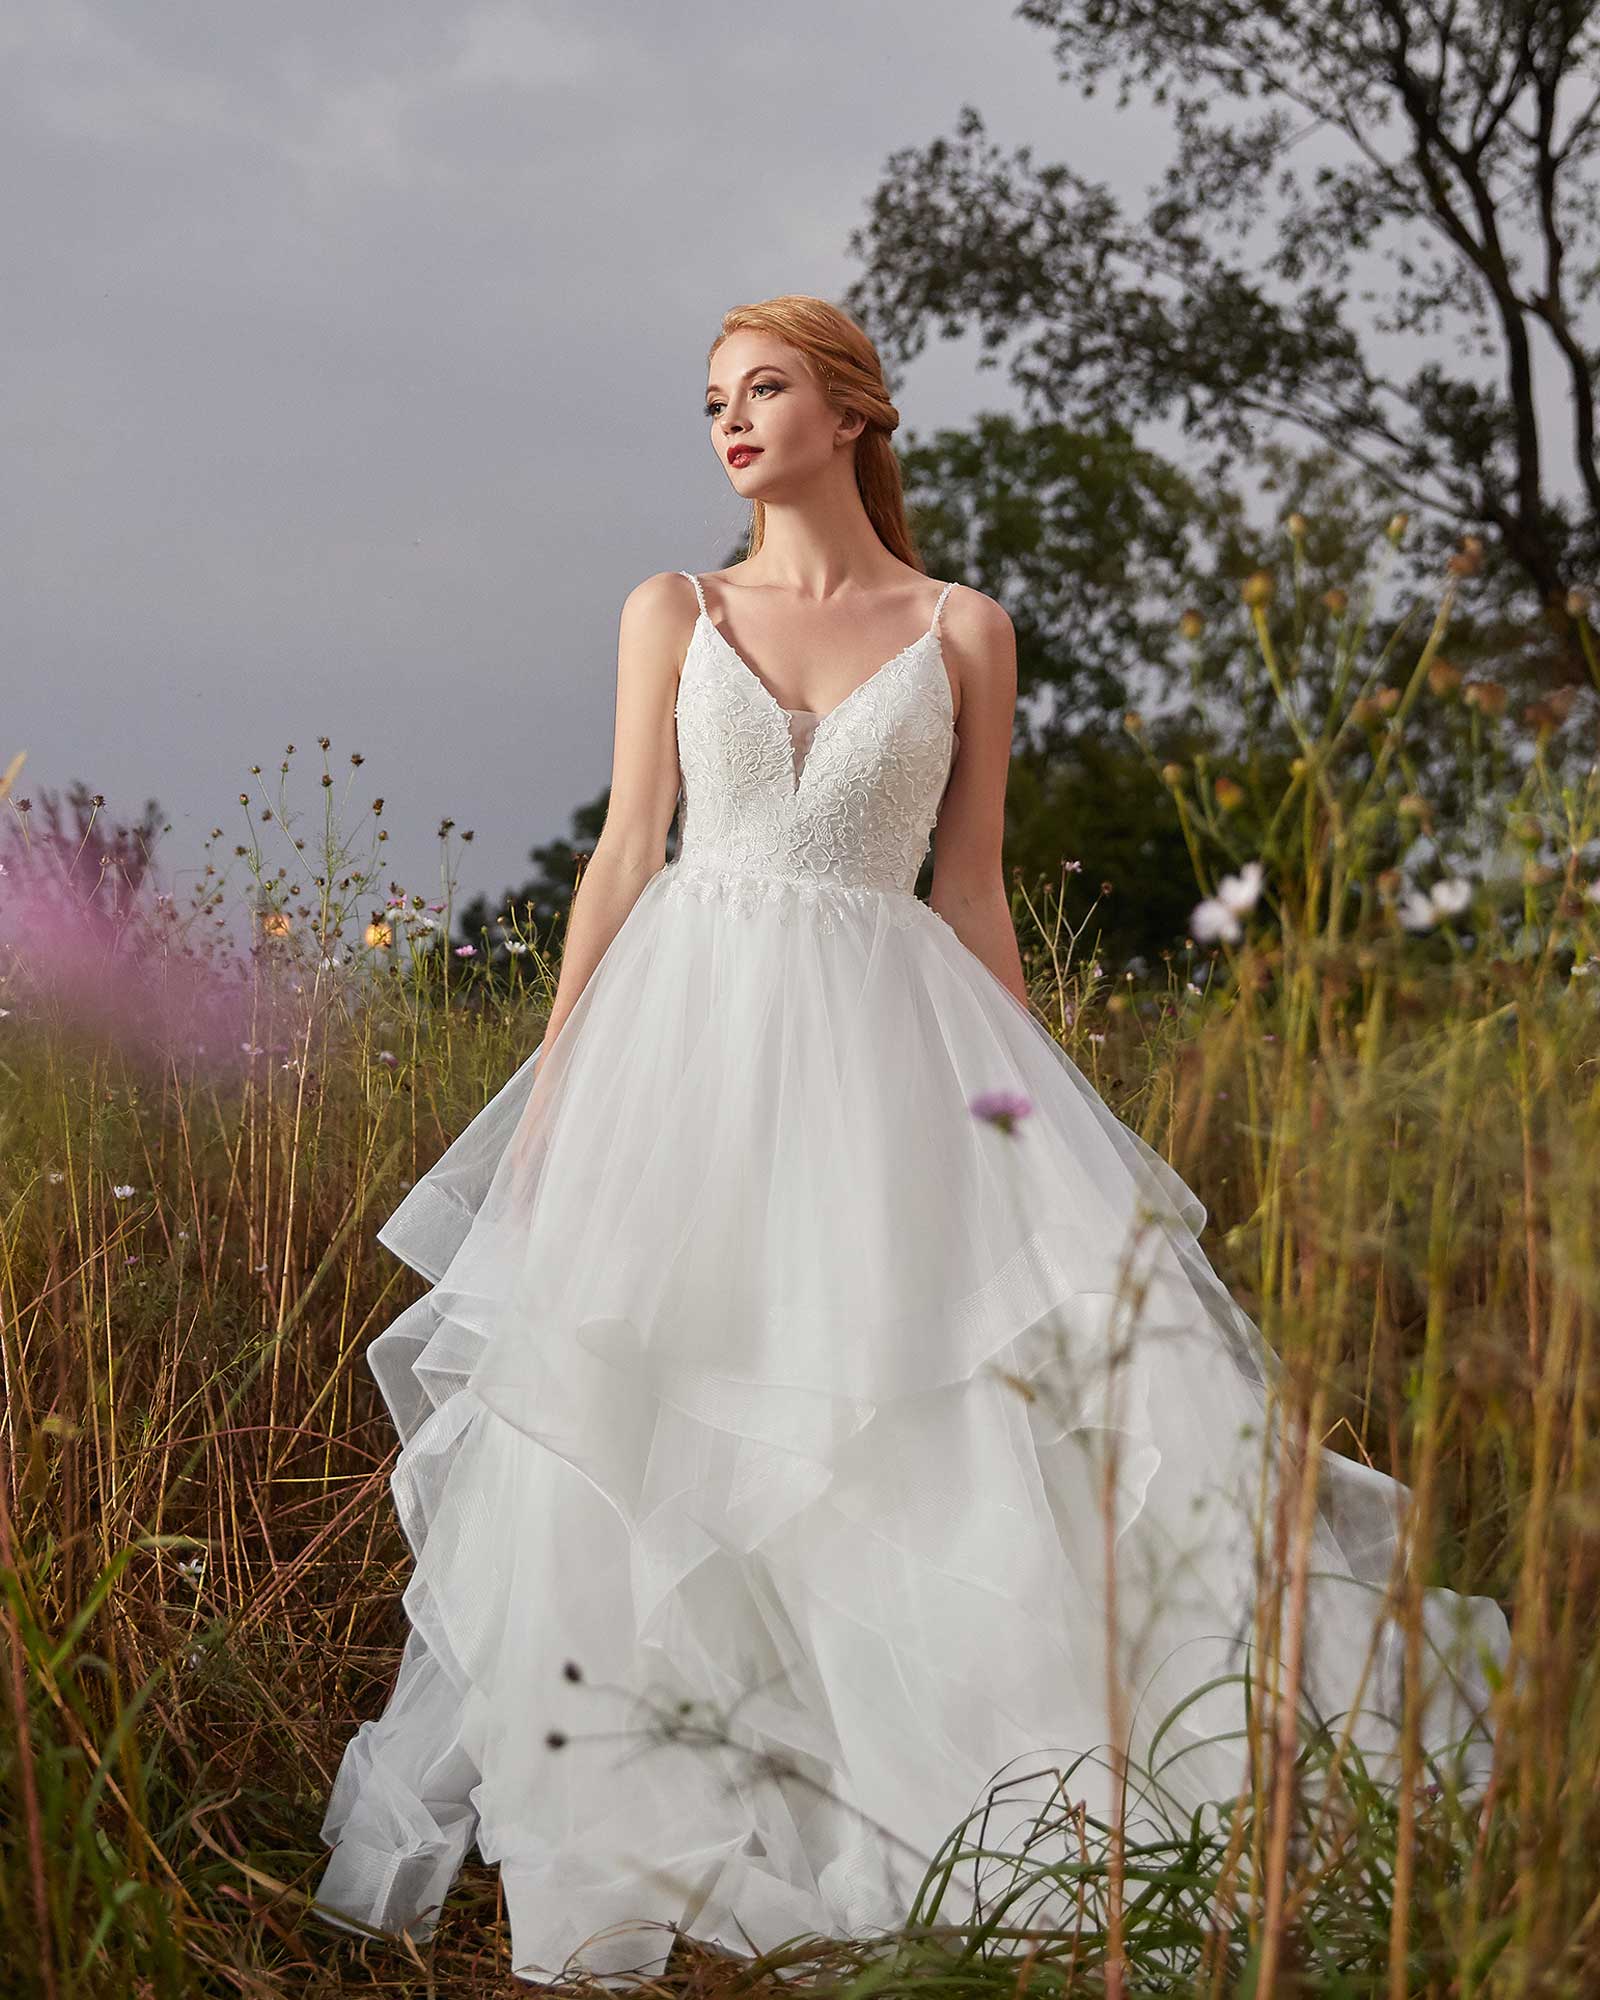 Introducing Cocomelody Fall/Winter 2020 Bridal Collection | Cocomelody Mag